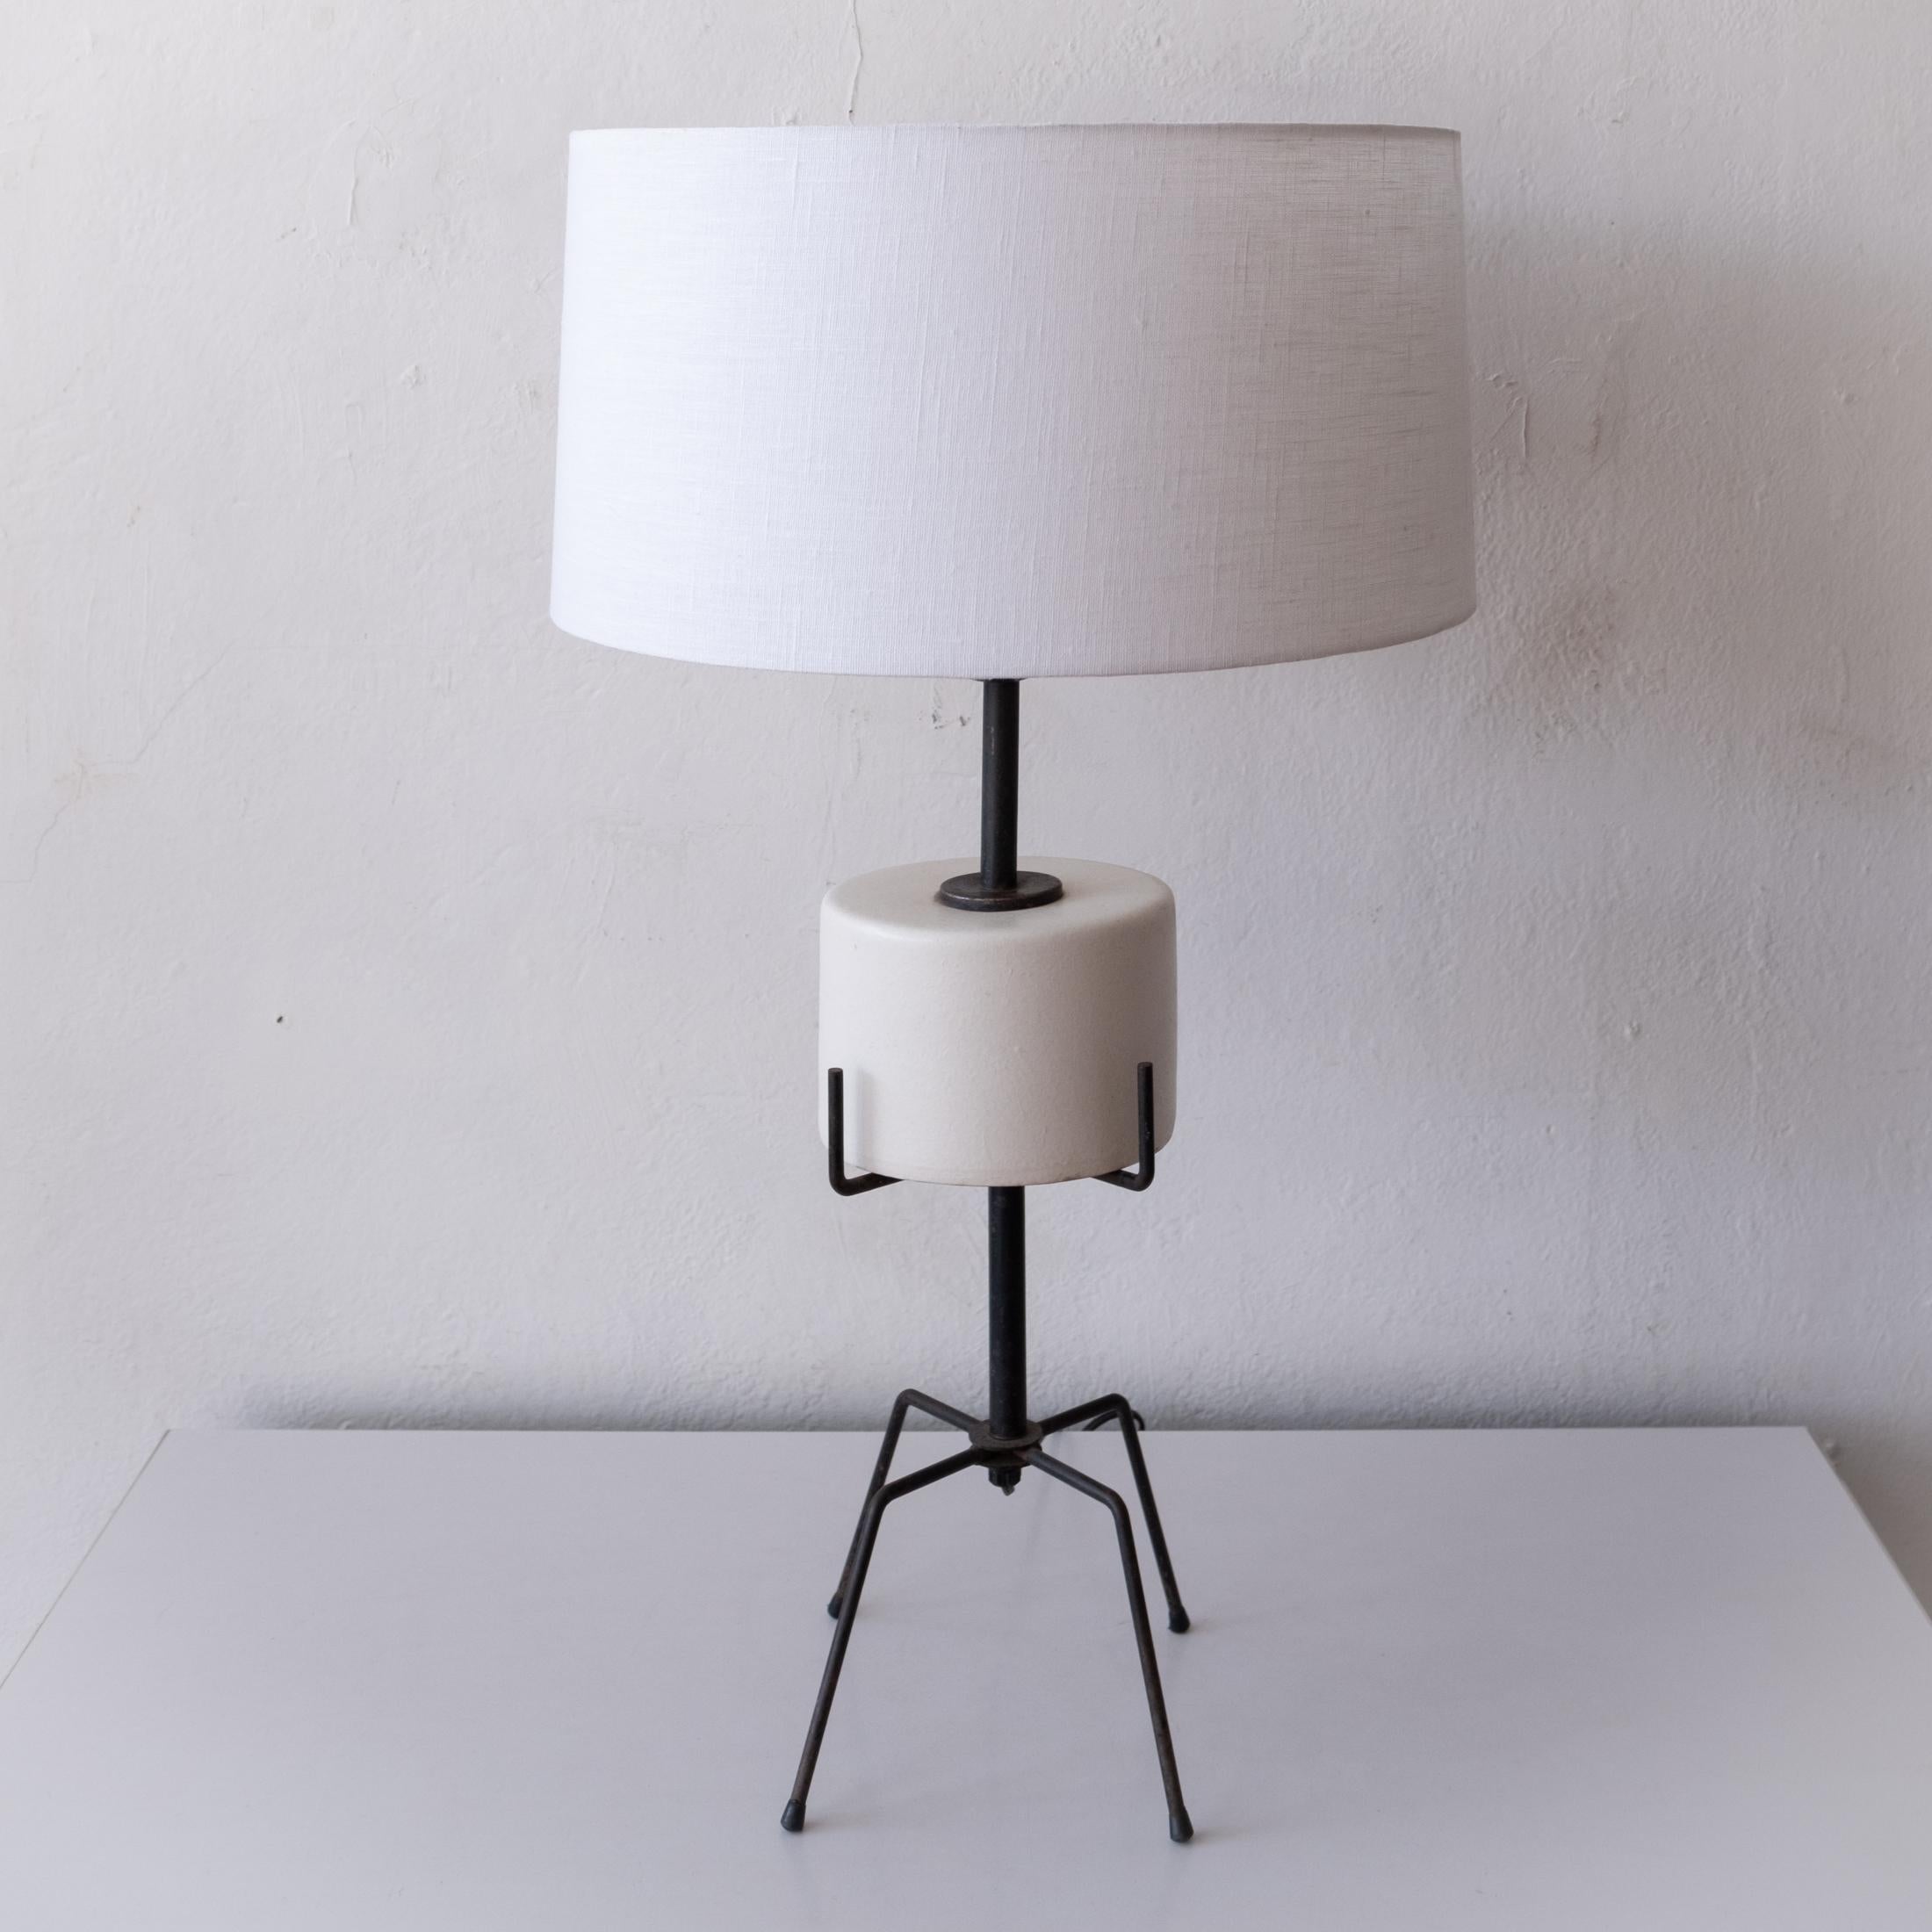 Rare sculptural Mid-Century ceramic and iron table lamp by prolific designer, Ben Seibel.  USA 1950s

Original wiring functions properly.  The glass diffuser will be included.  